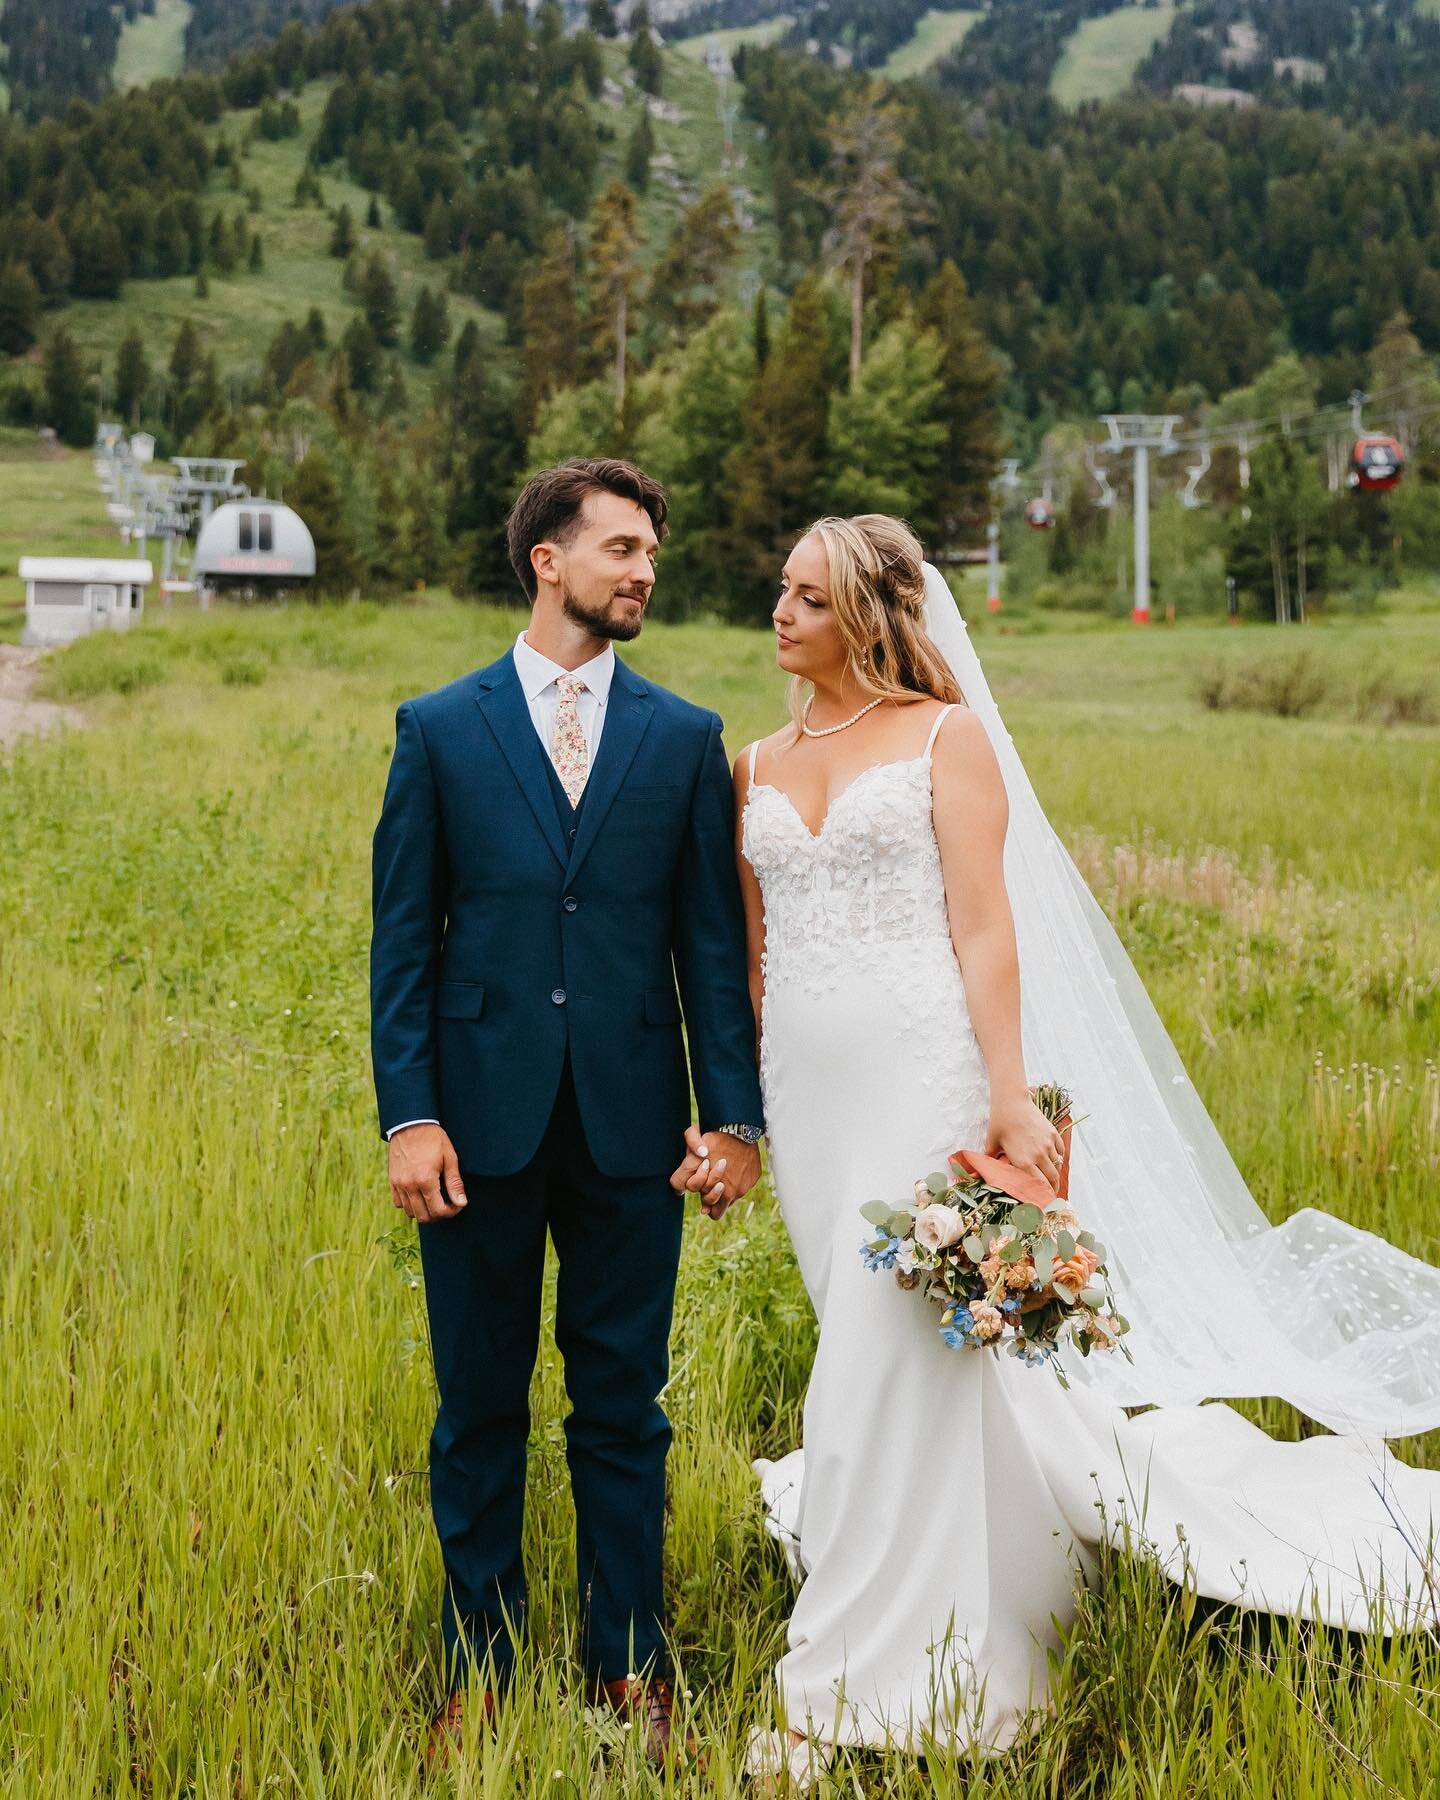 A few sneaks from Sarah and Brad&rsquo;s colorful day in Jackson Hole last month 🌸⛰️🌼
.
.
.
#utahweddingphotographer #utahphotographer #weddingphotography #weddinginspiration #colorfulwedding #weddingvenue #jacksonholewedding #jacksonholeweddingpho